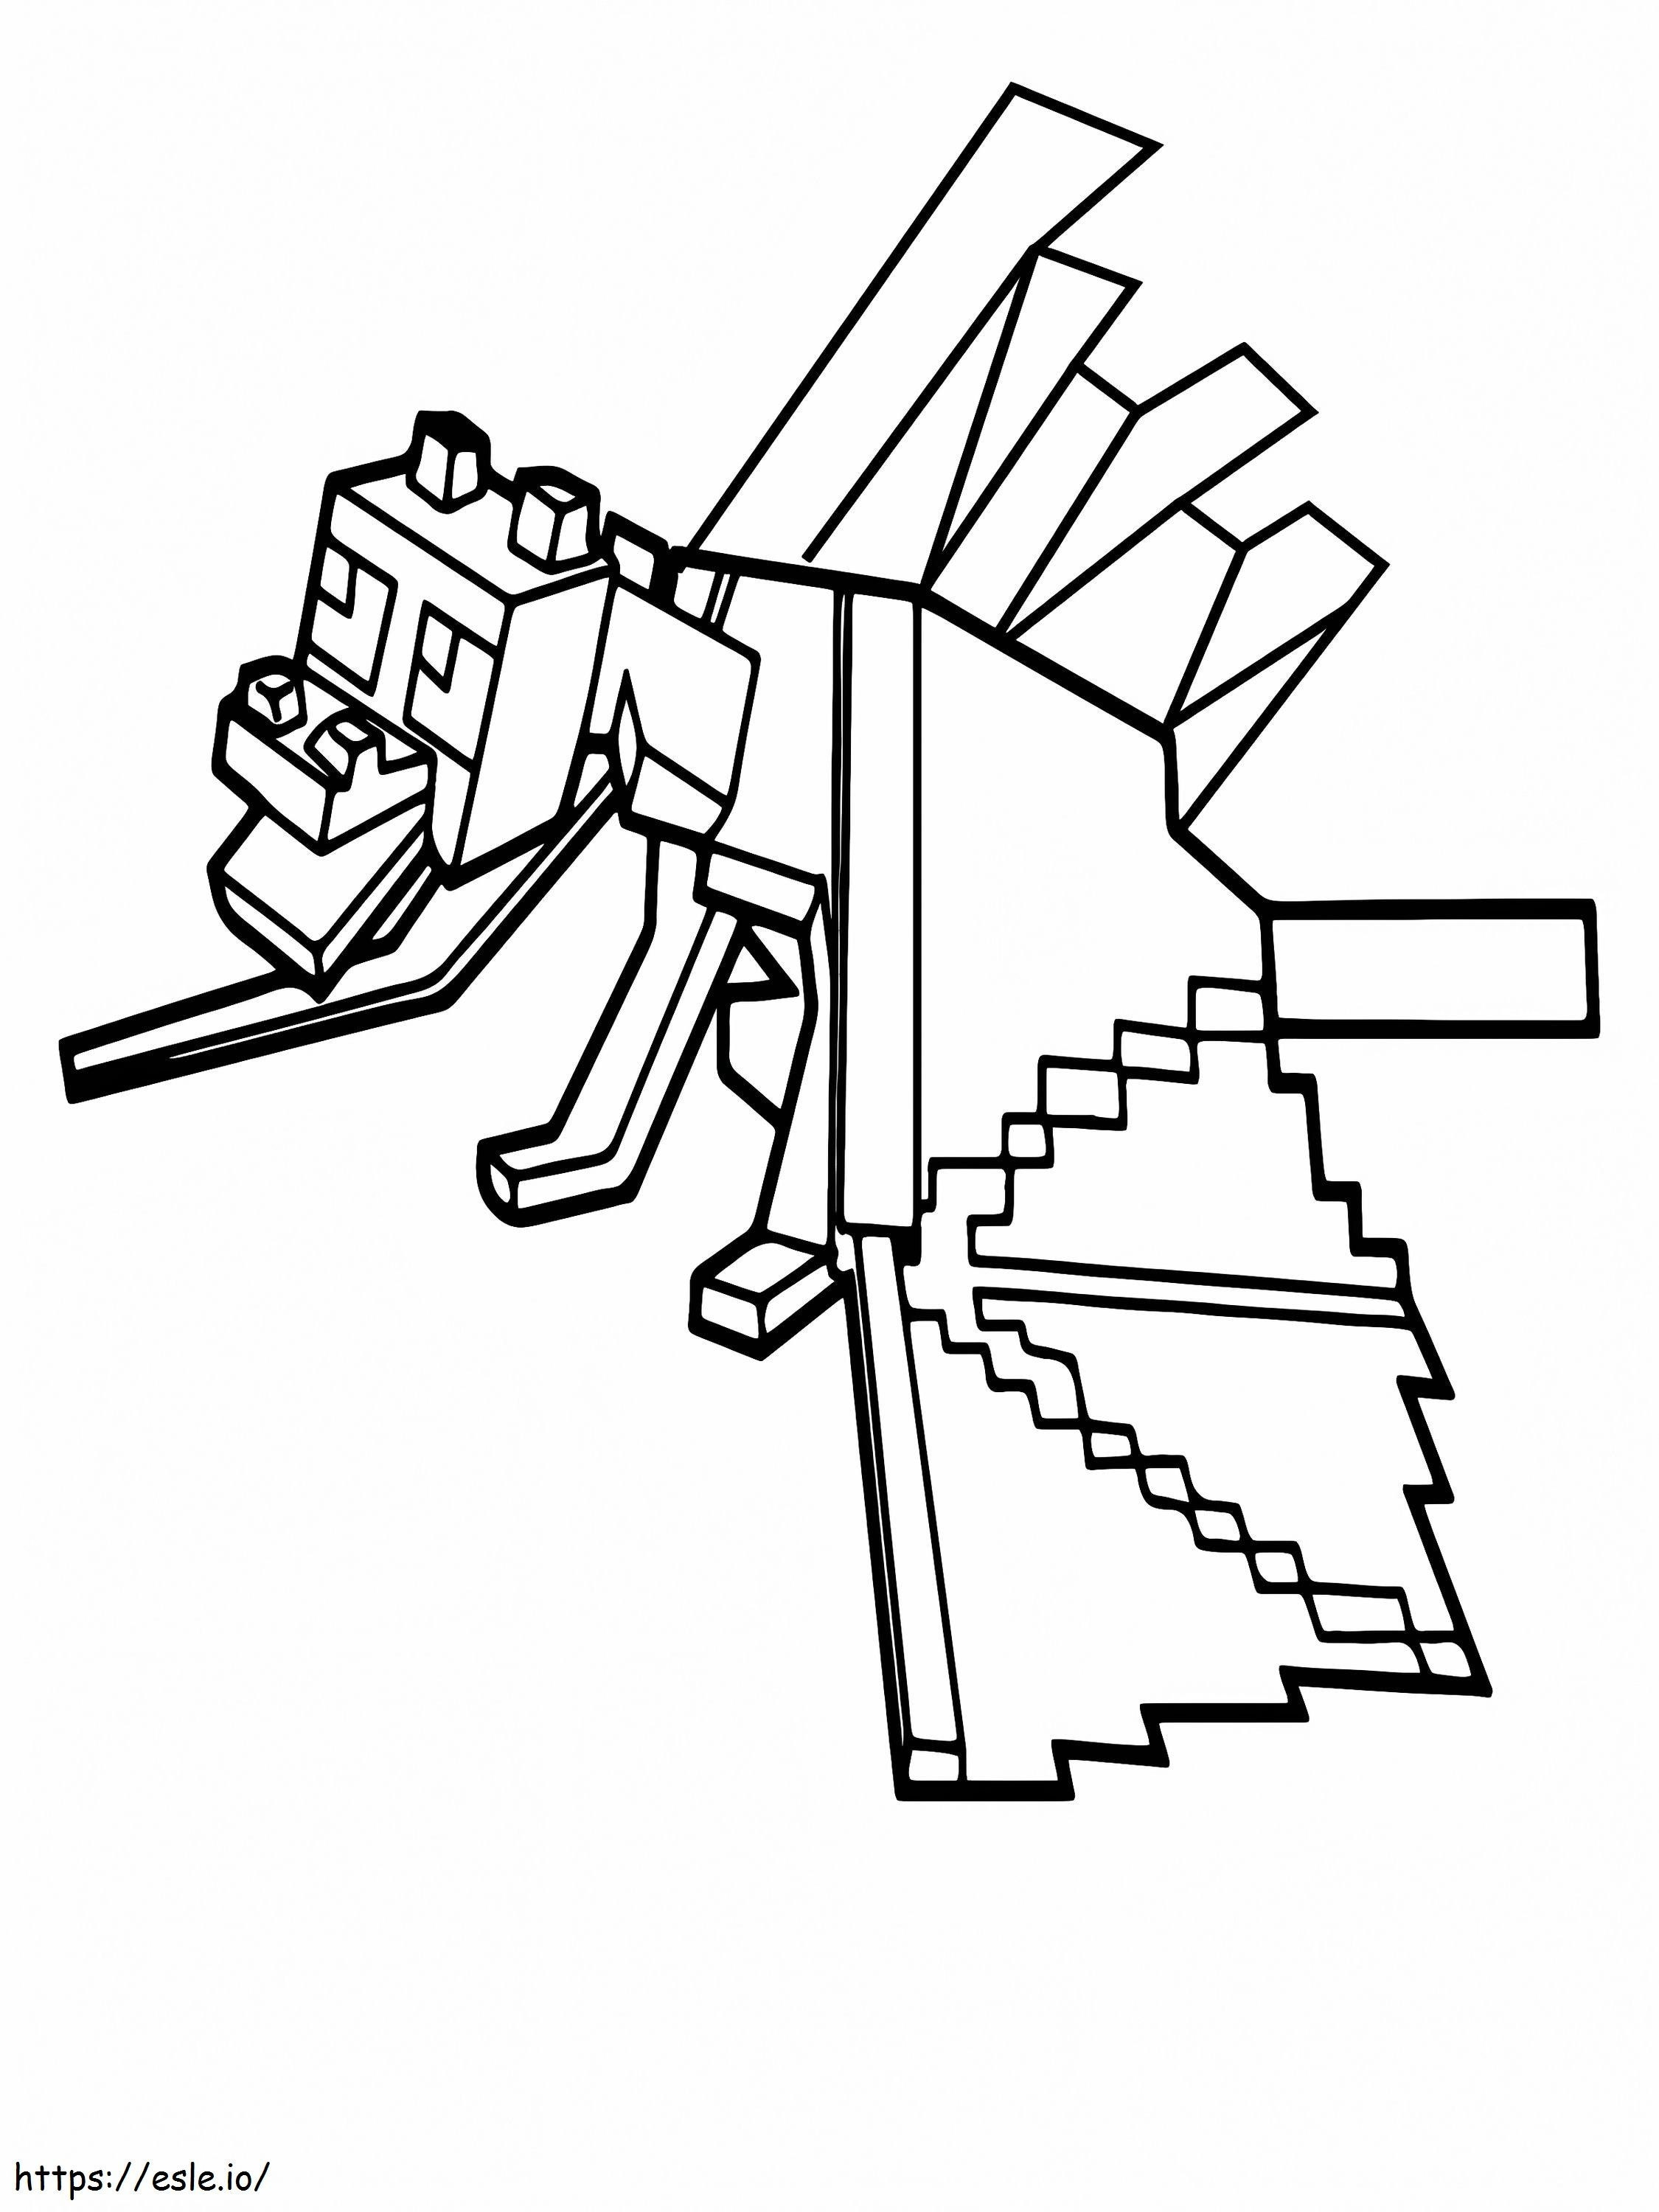 Resting Minecraft Dragon coloring page